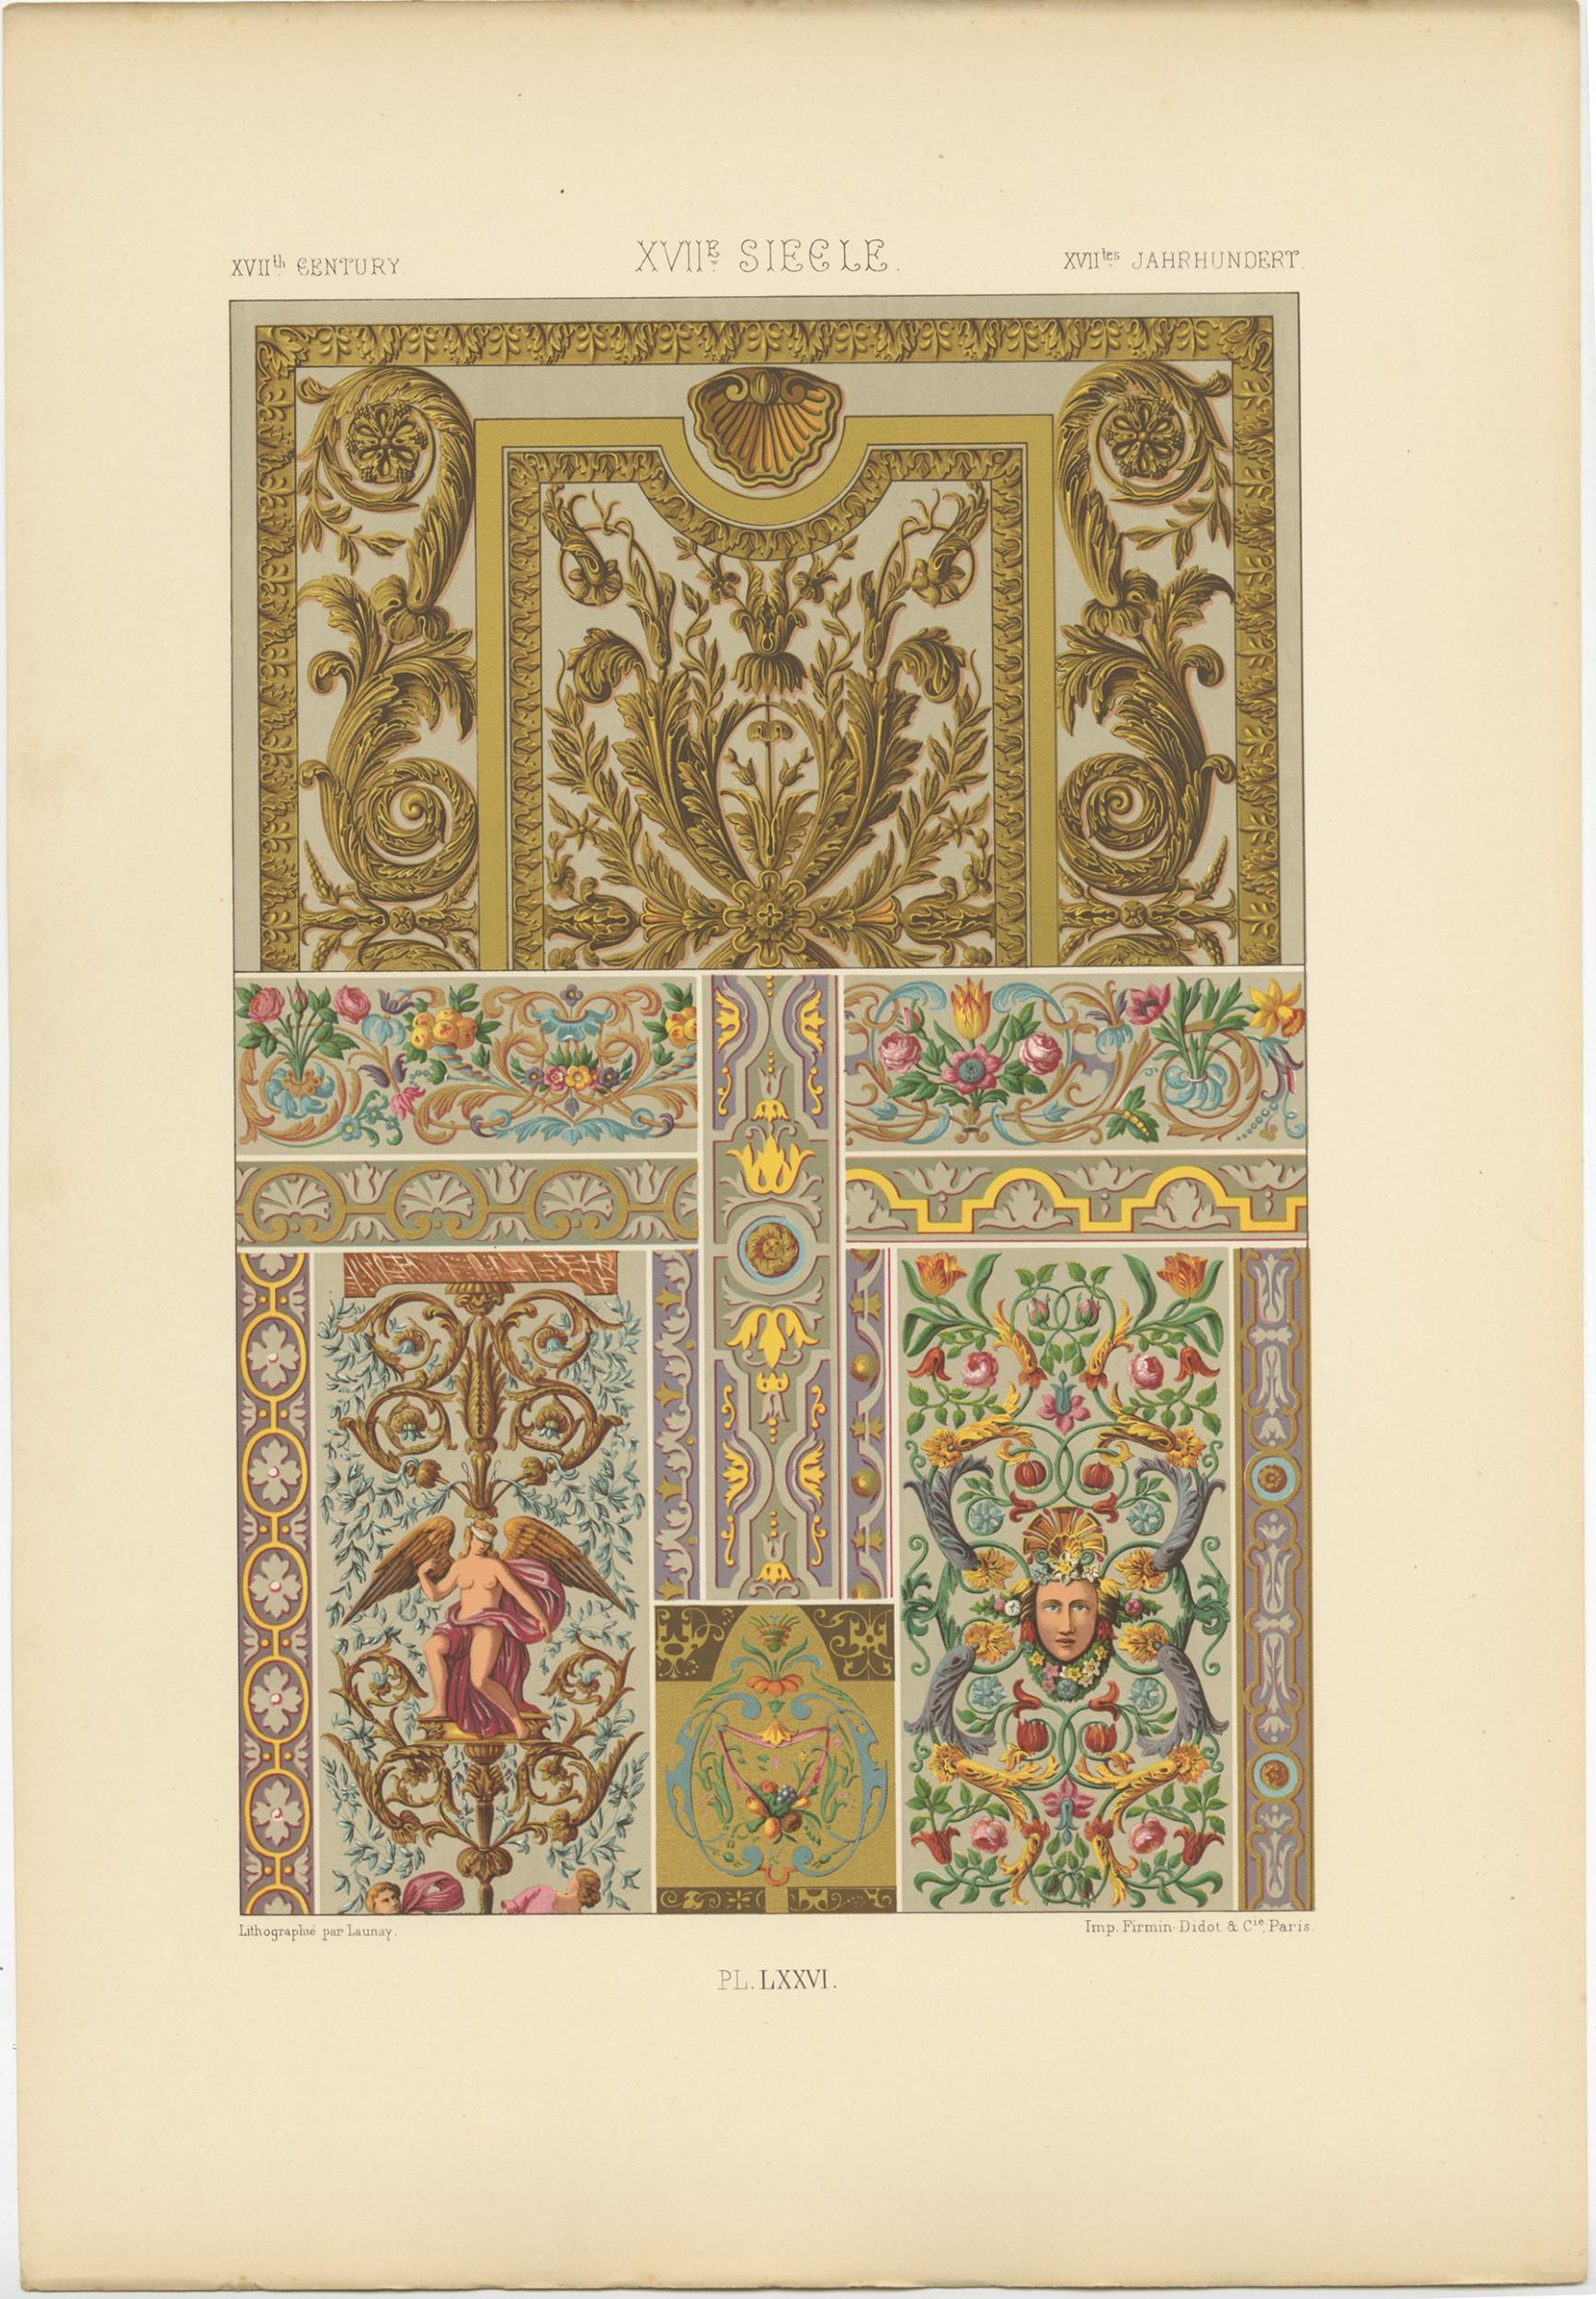 Antique print titled ' XVIIth Century - XVIIe Siecle - XVIItes Jahrhundert'. Chromolithograph of XVIIth Century ornaments and decorative arts. This print originates from 'l'Ornement Polychrome' by Auguste Racinet. Published circa 1890.